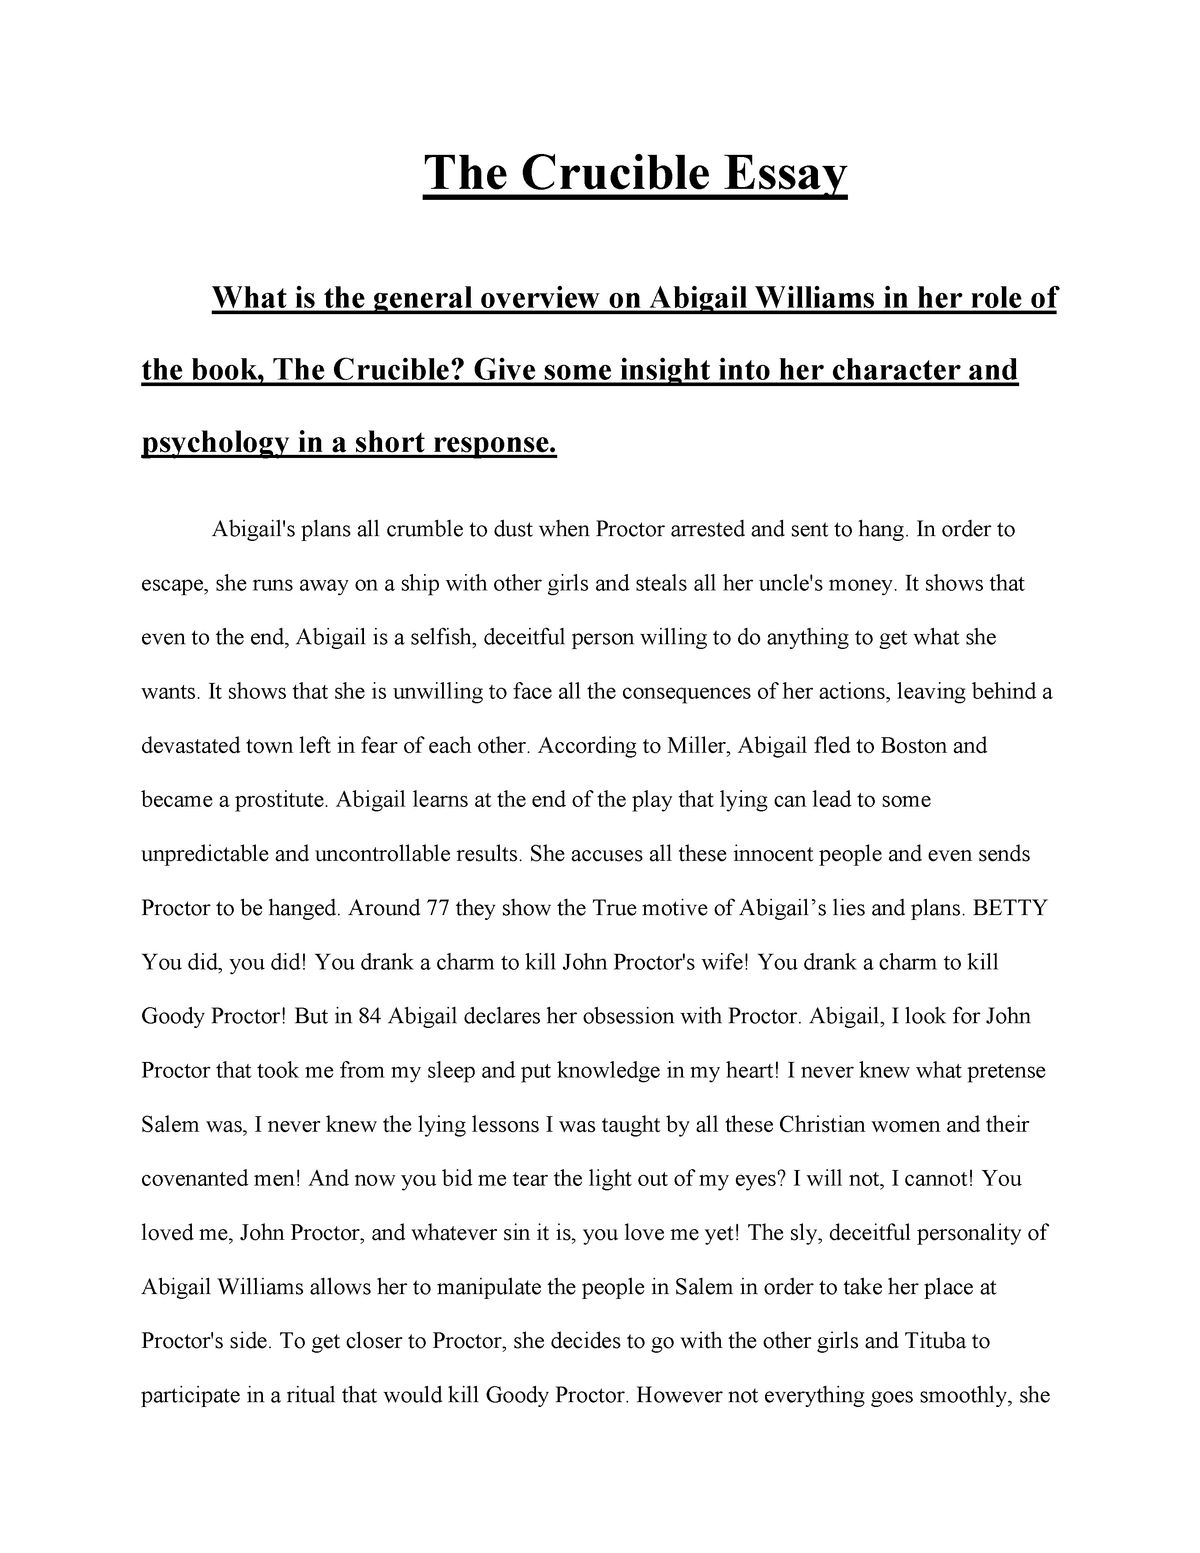 thesis for the crucible essay